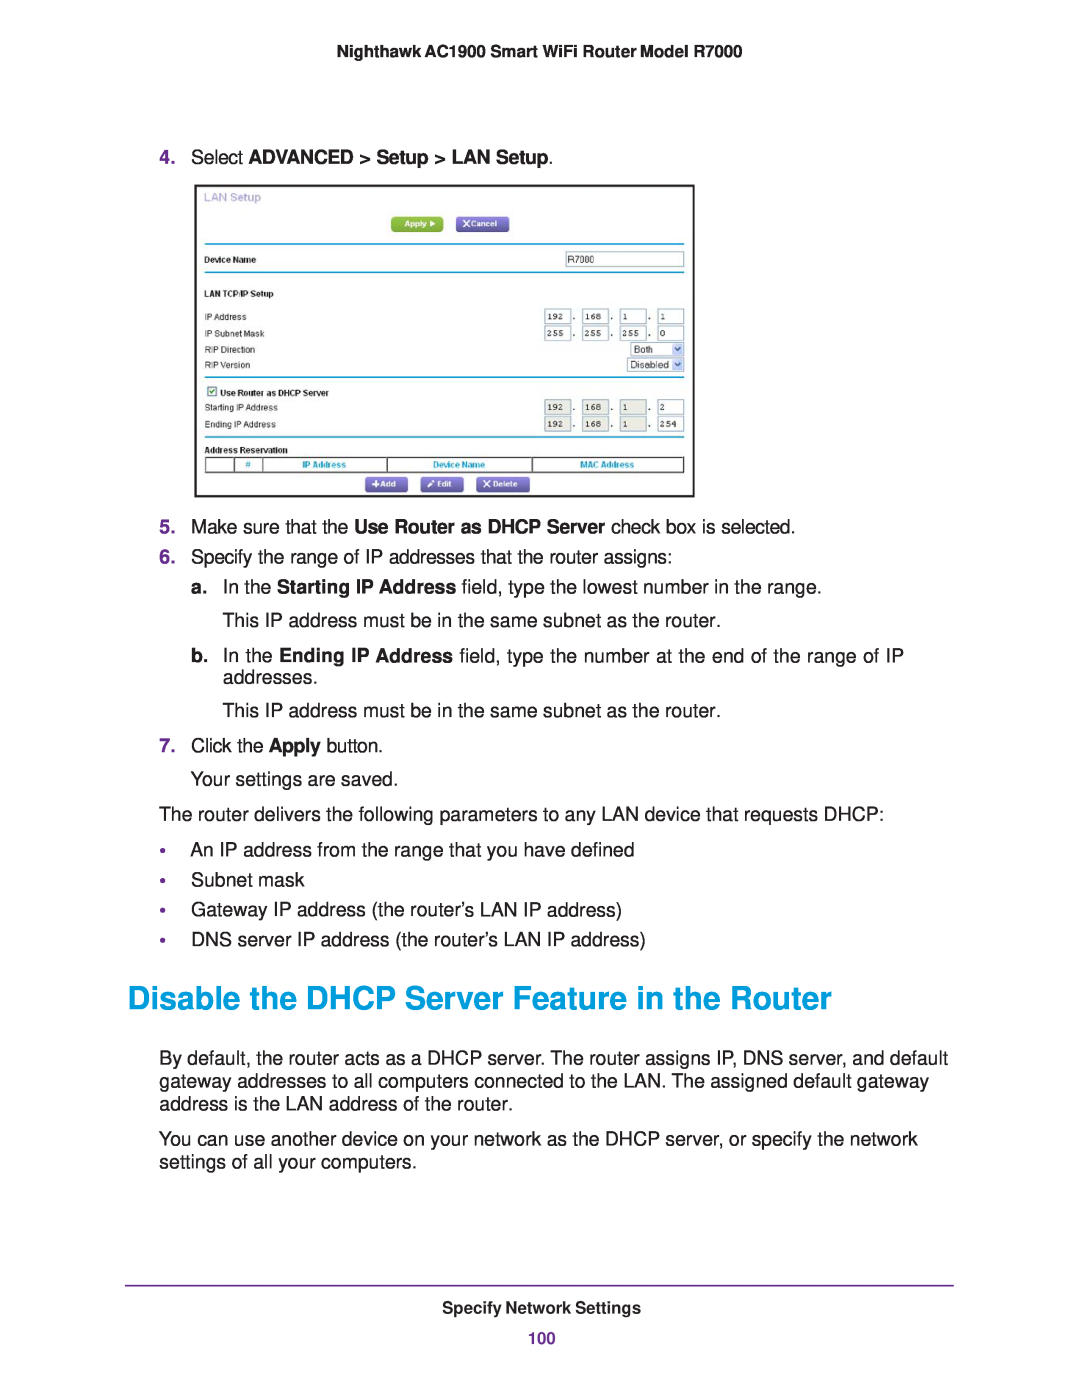 NETGEAR R7000 user manual Disable the DHCP Server Feature in the Router, Select ADVANCED Setup LAN Setup 